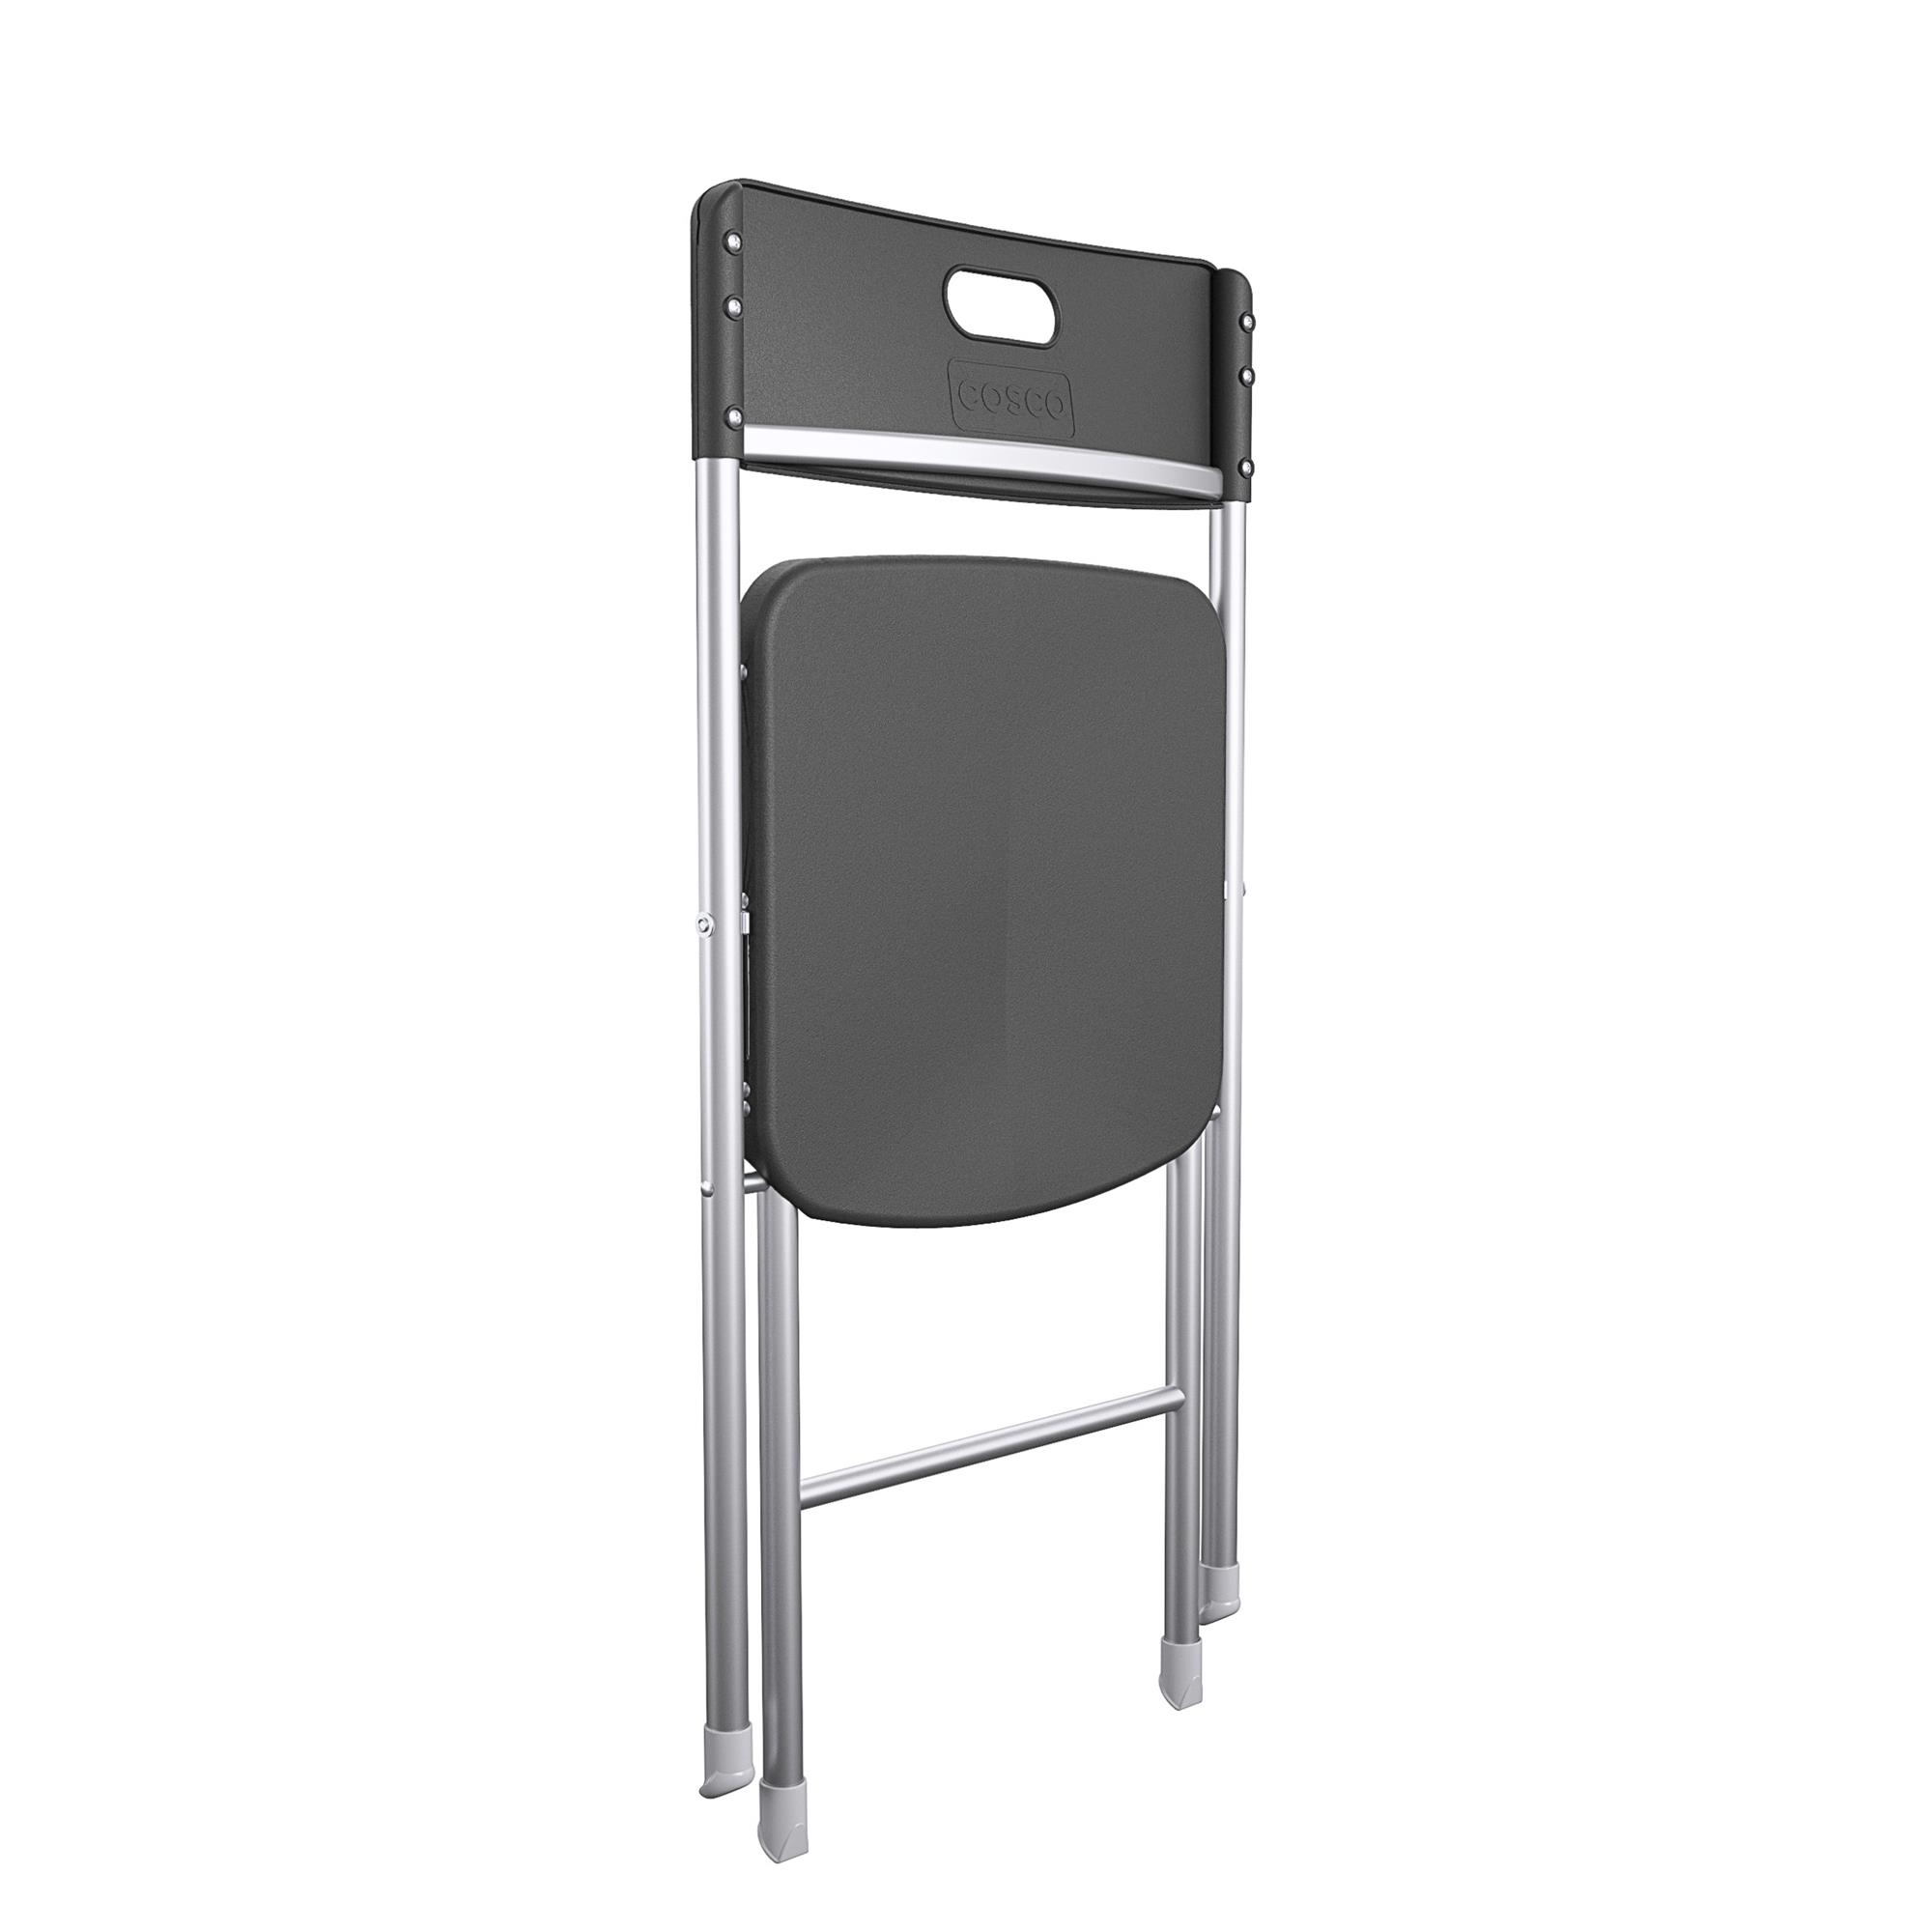 Mainstays Resin Seat & Back Folding Chair, Black - image 5 of 7